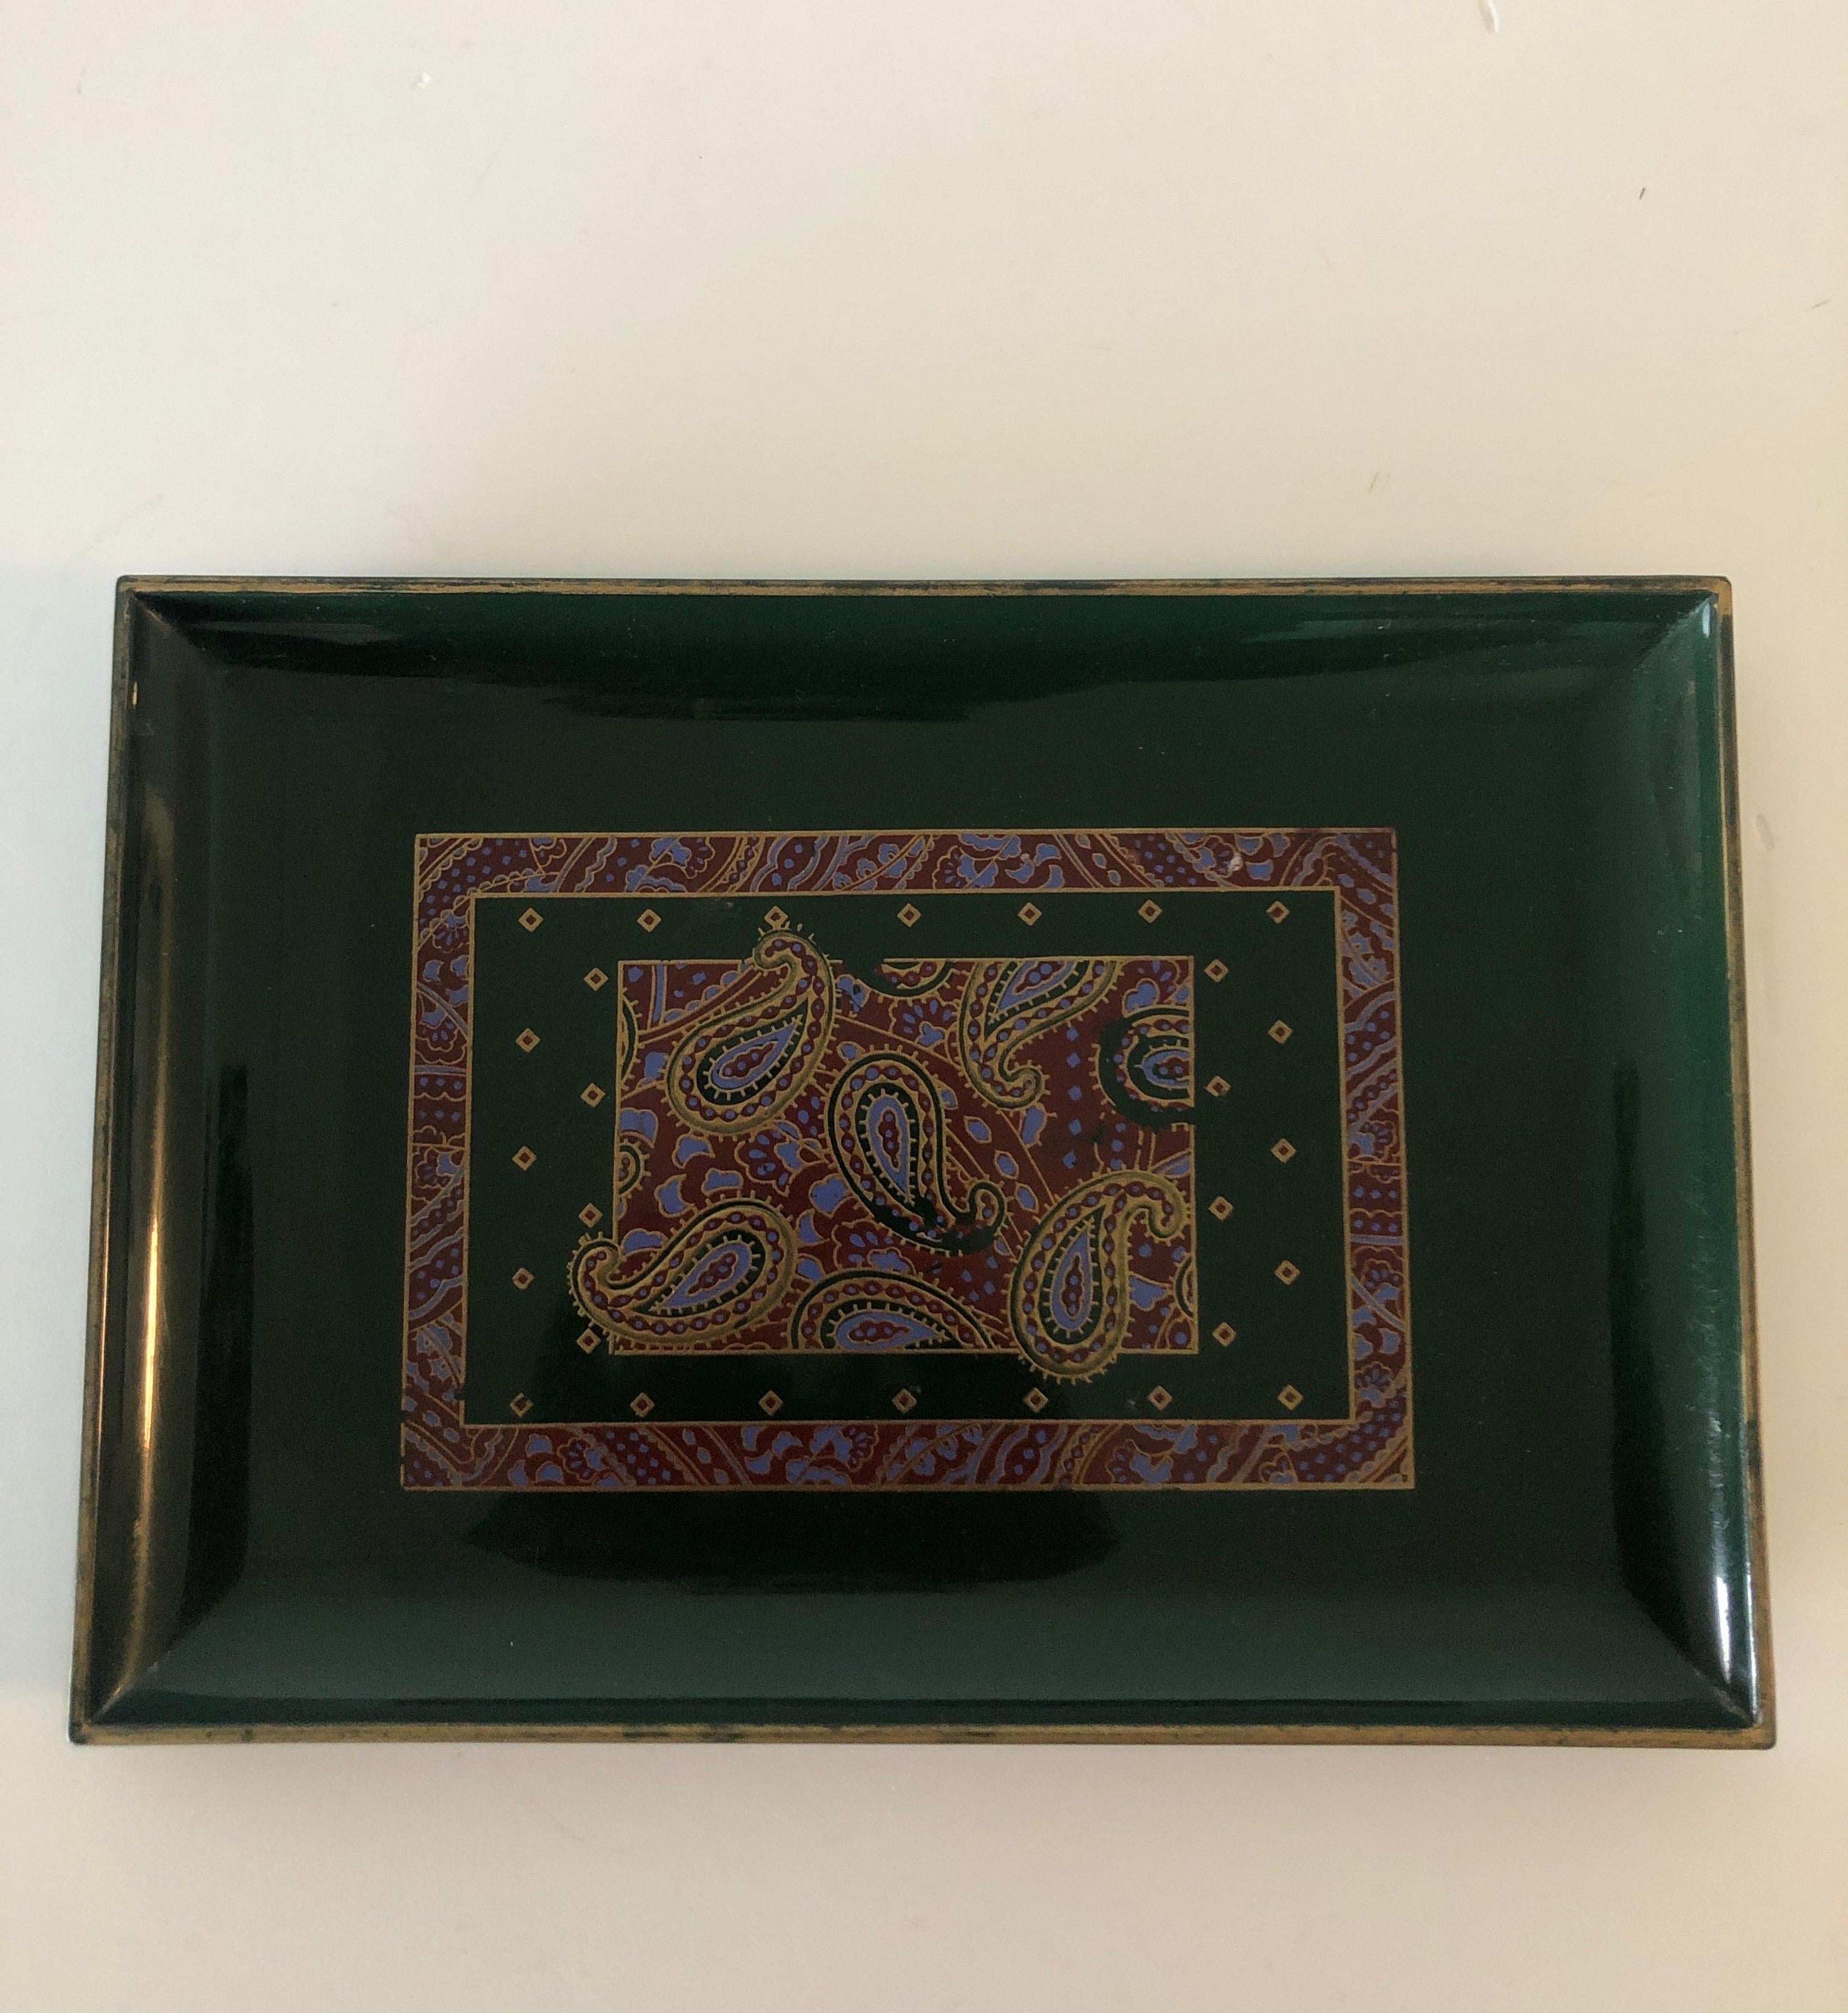 Japanese Paisley Faux Lacquerware Small Tray
In shades of green, orange and red with paisley details
Stamped OTAGIRI Japan
Size: 8 x 6 x 0.25.